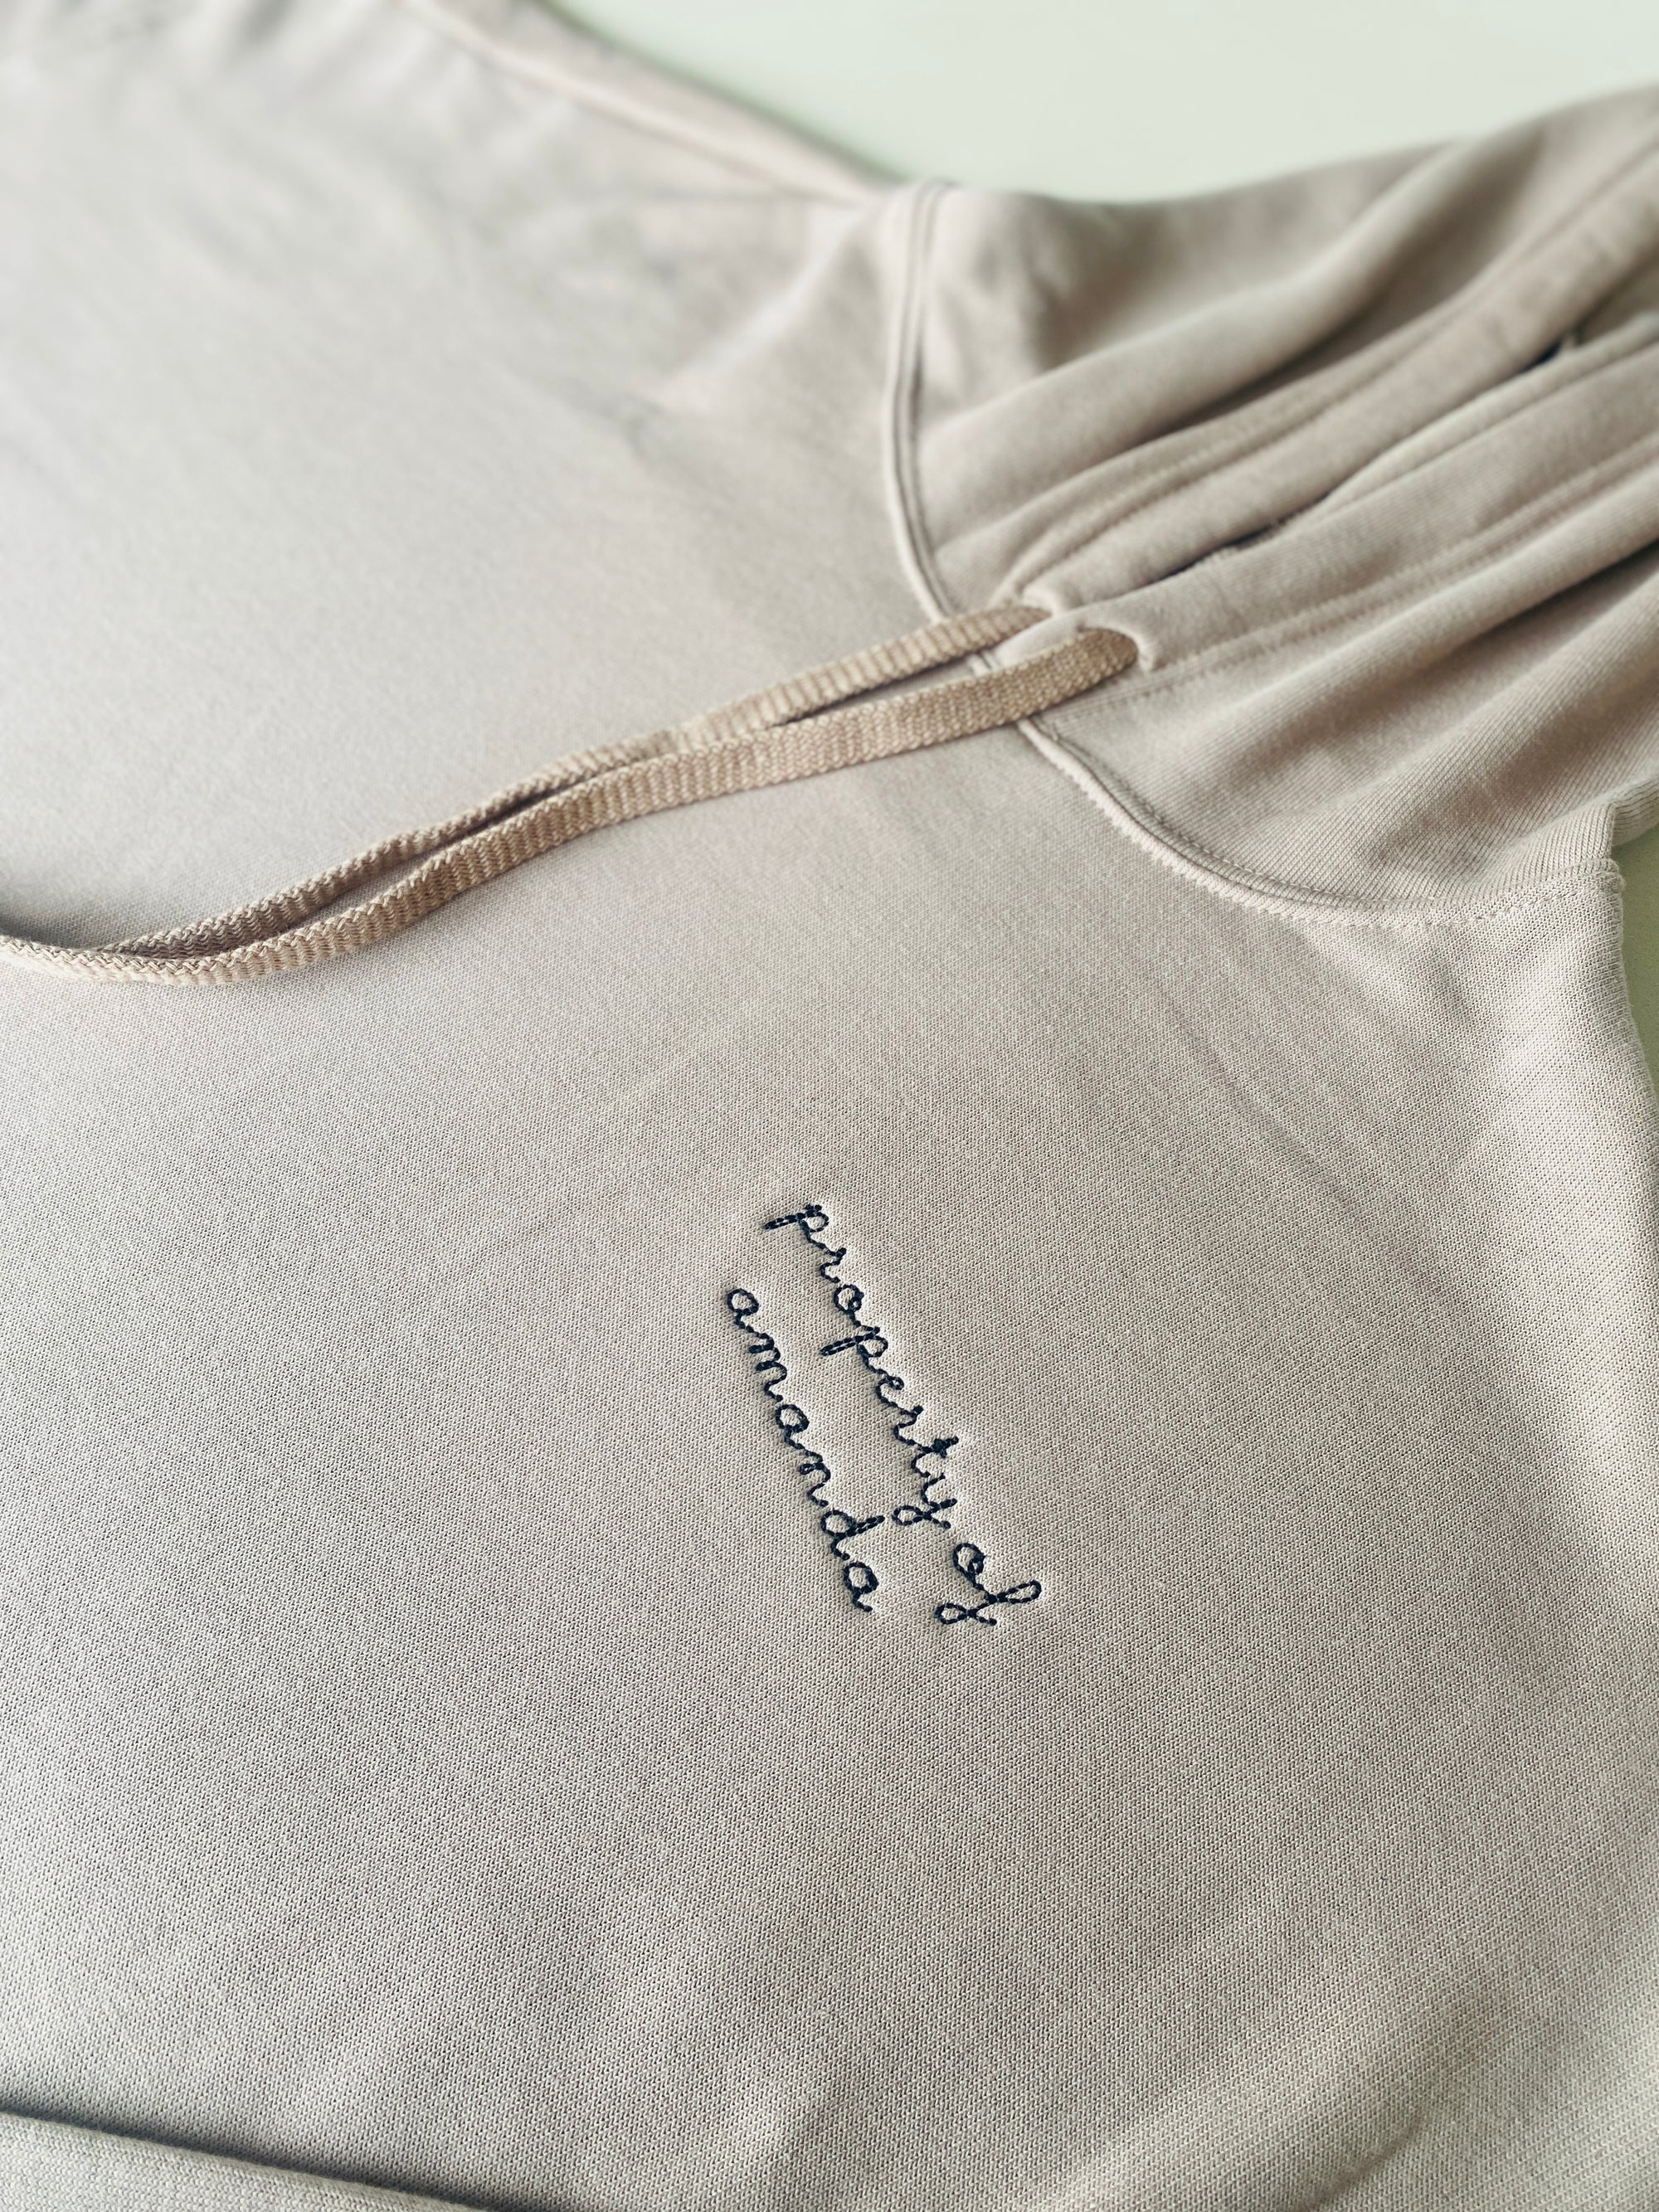 "property of (name)" Adult Supersoft Hoodie